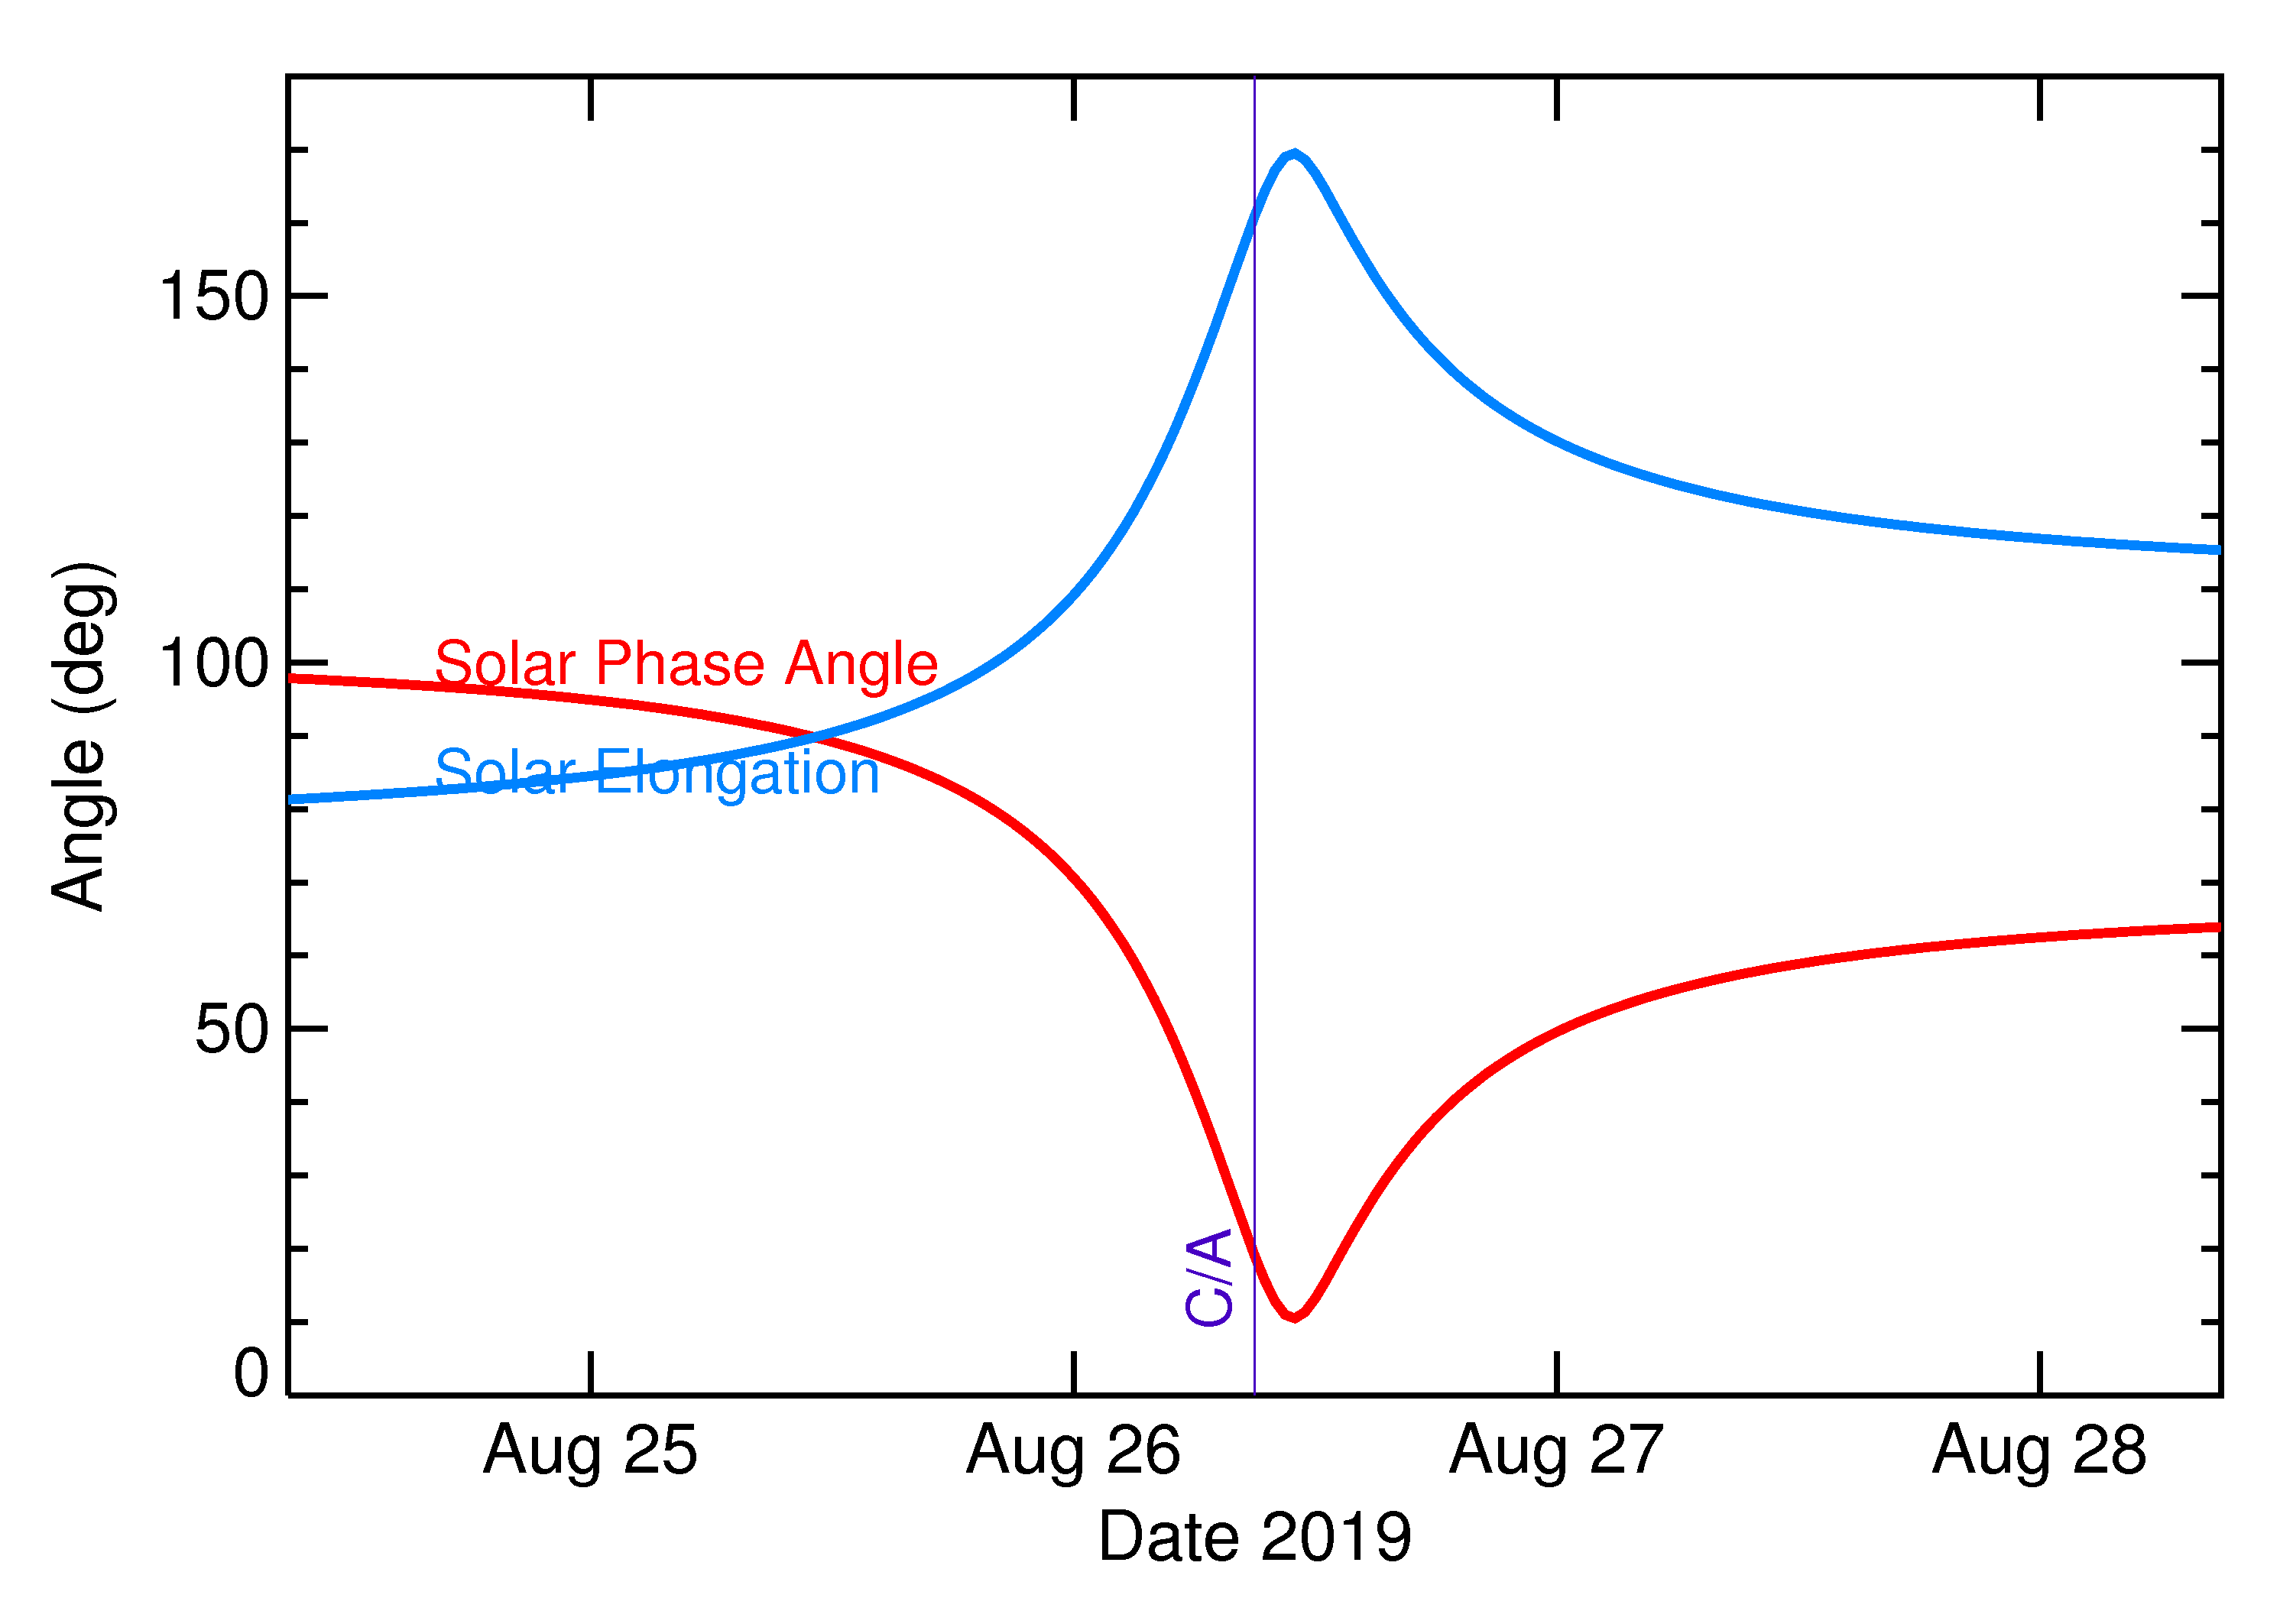 Solar Elongation and Solar Phase Angle of 2019 QR8 in the days around closest approach